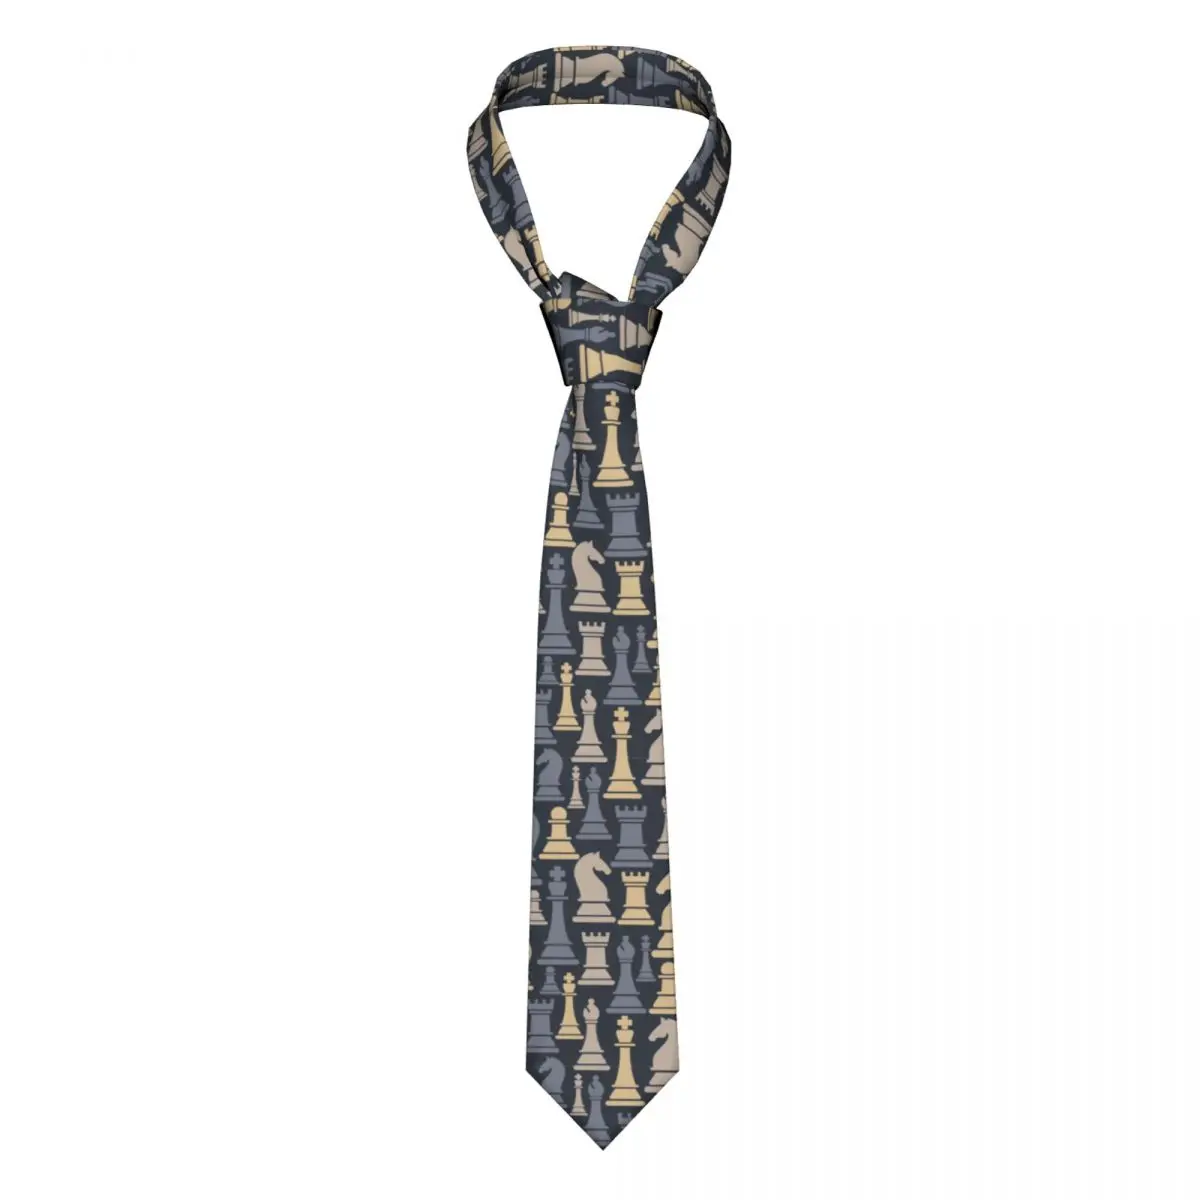 

Game Of Chess Neckties Unisex Casual Polyester 8 cm Narrow Neck Ties for Men Suits Accessories Gravatas Wedding Business